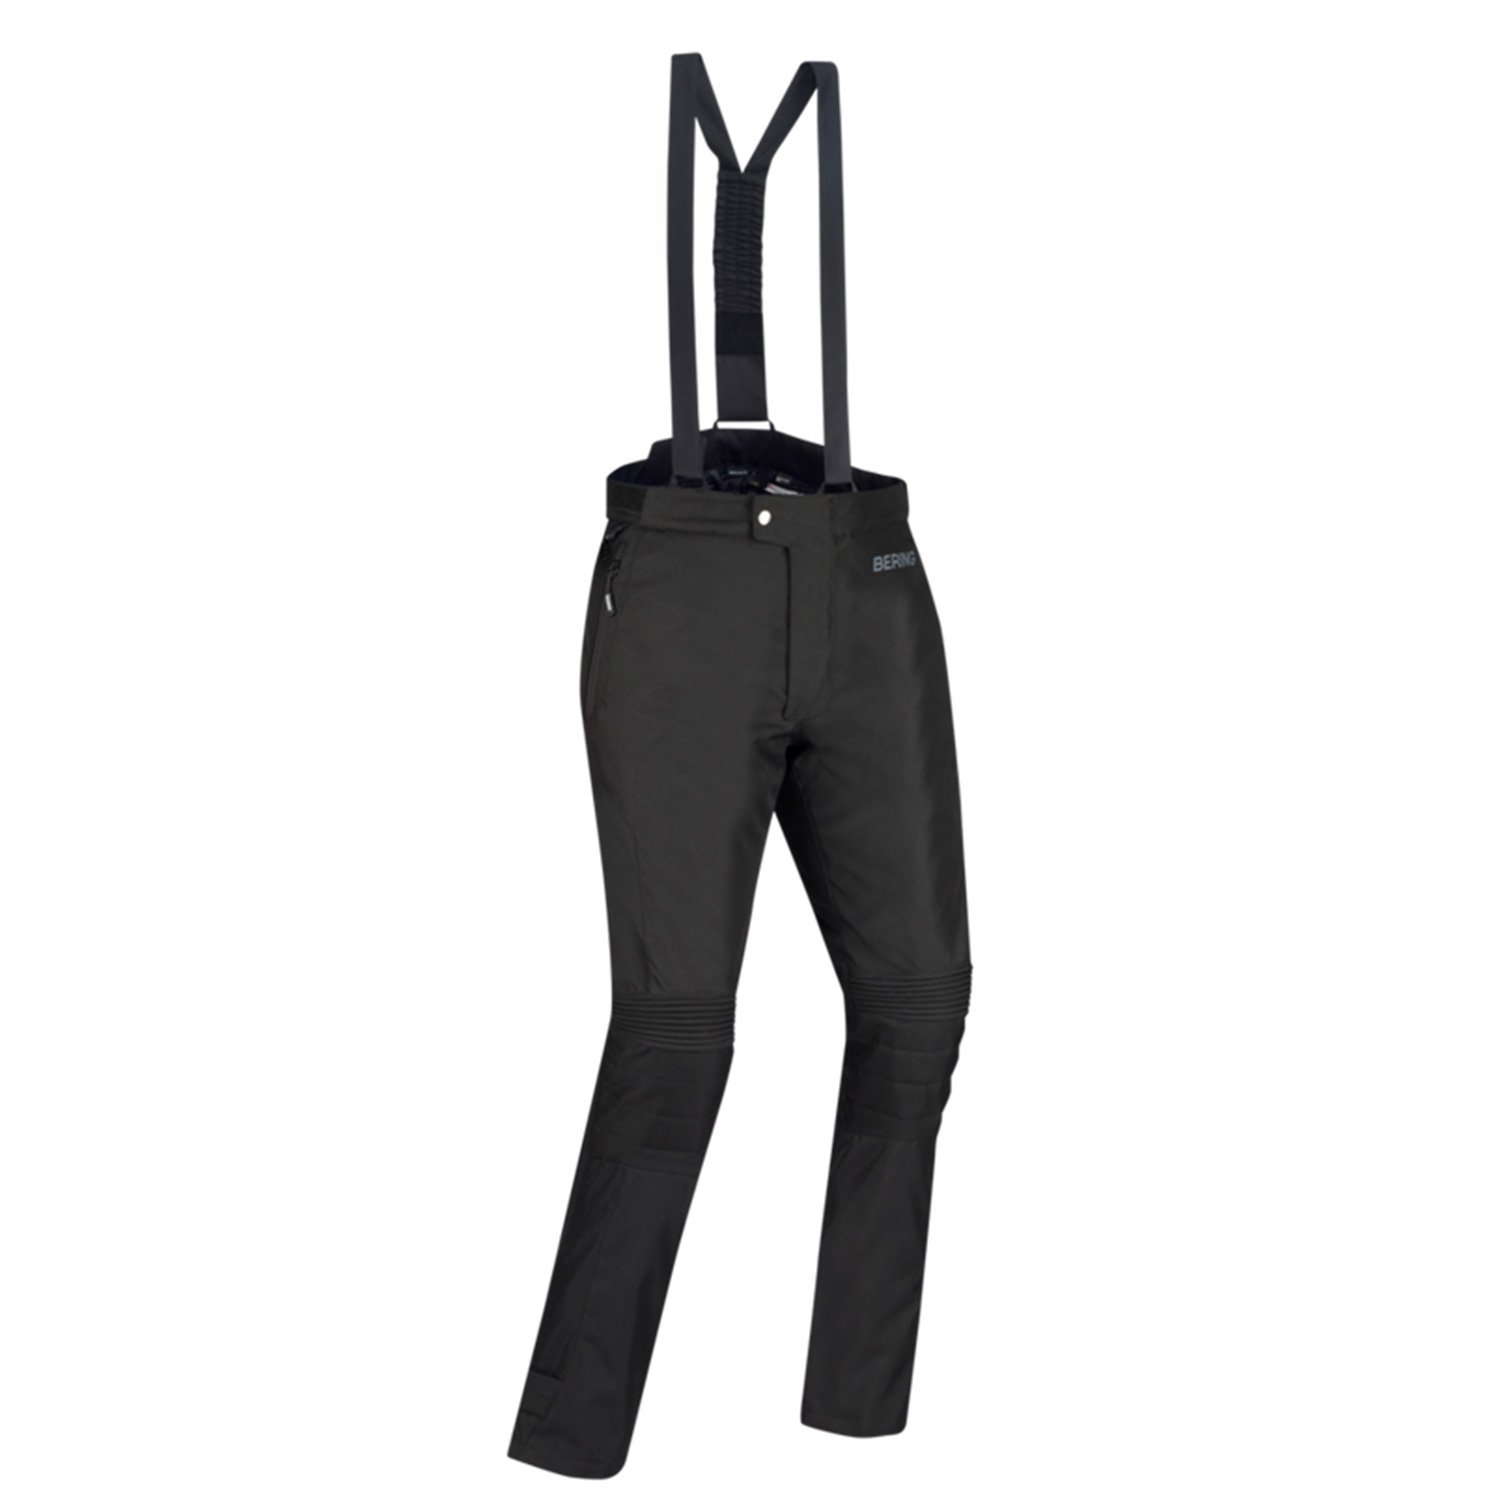 Image of Bering Lady Siberia Trousers Black Size T1 ID 3660815182901